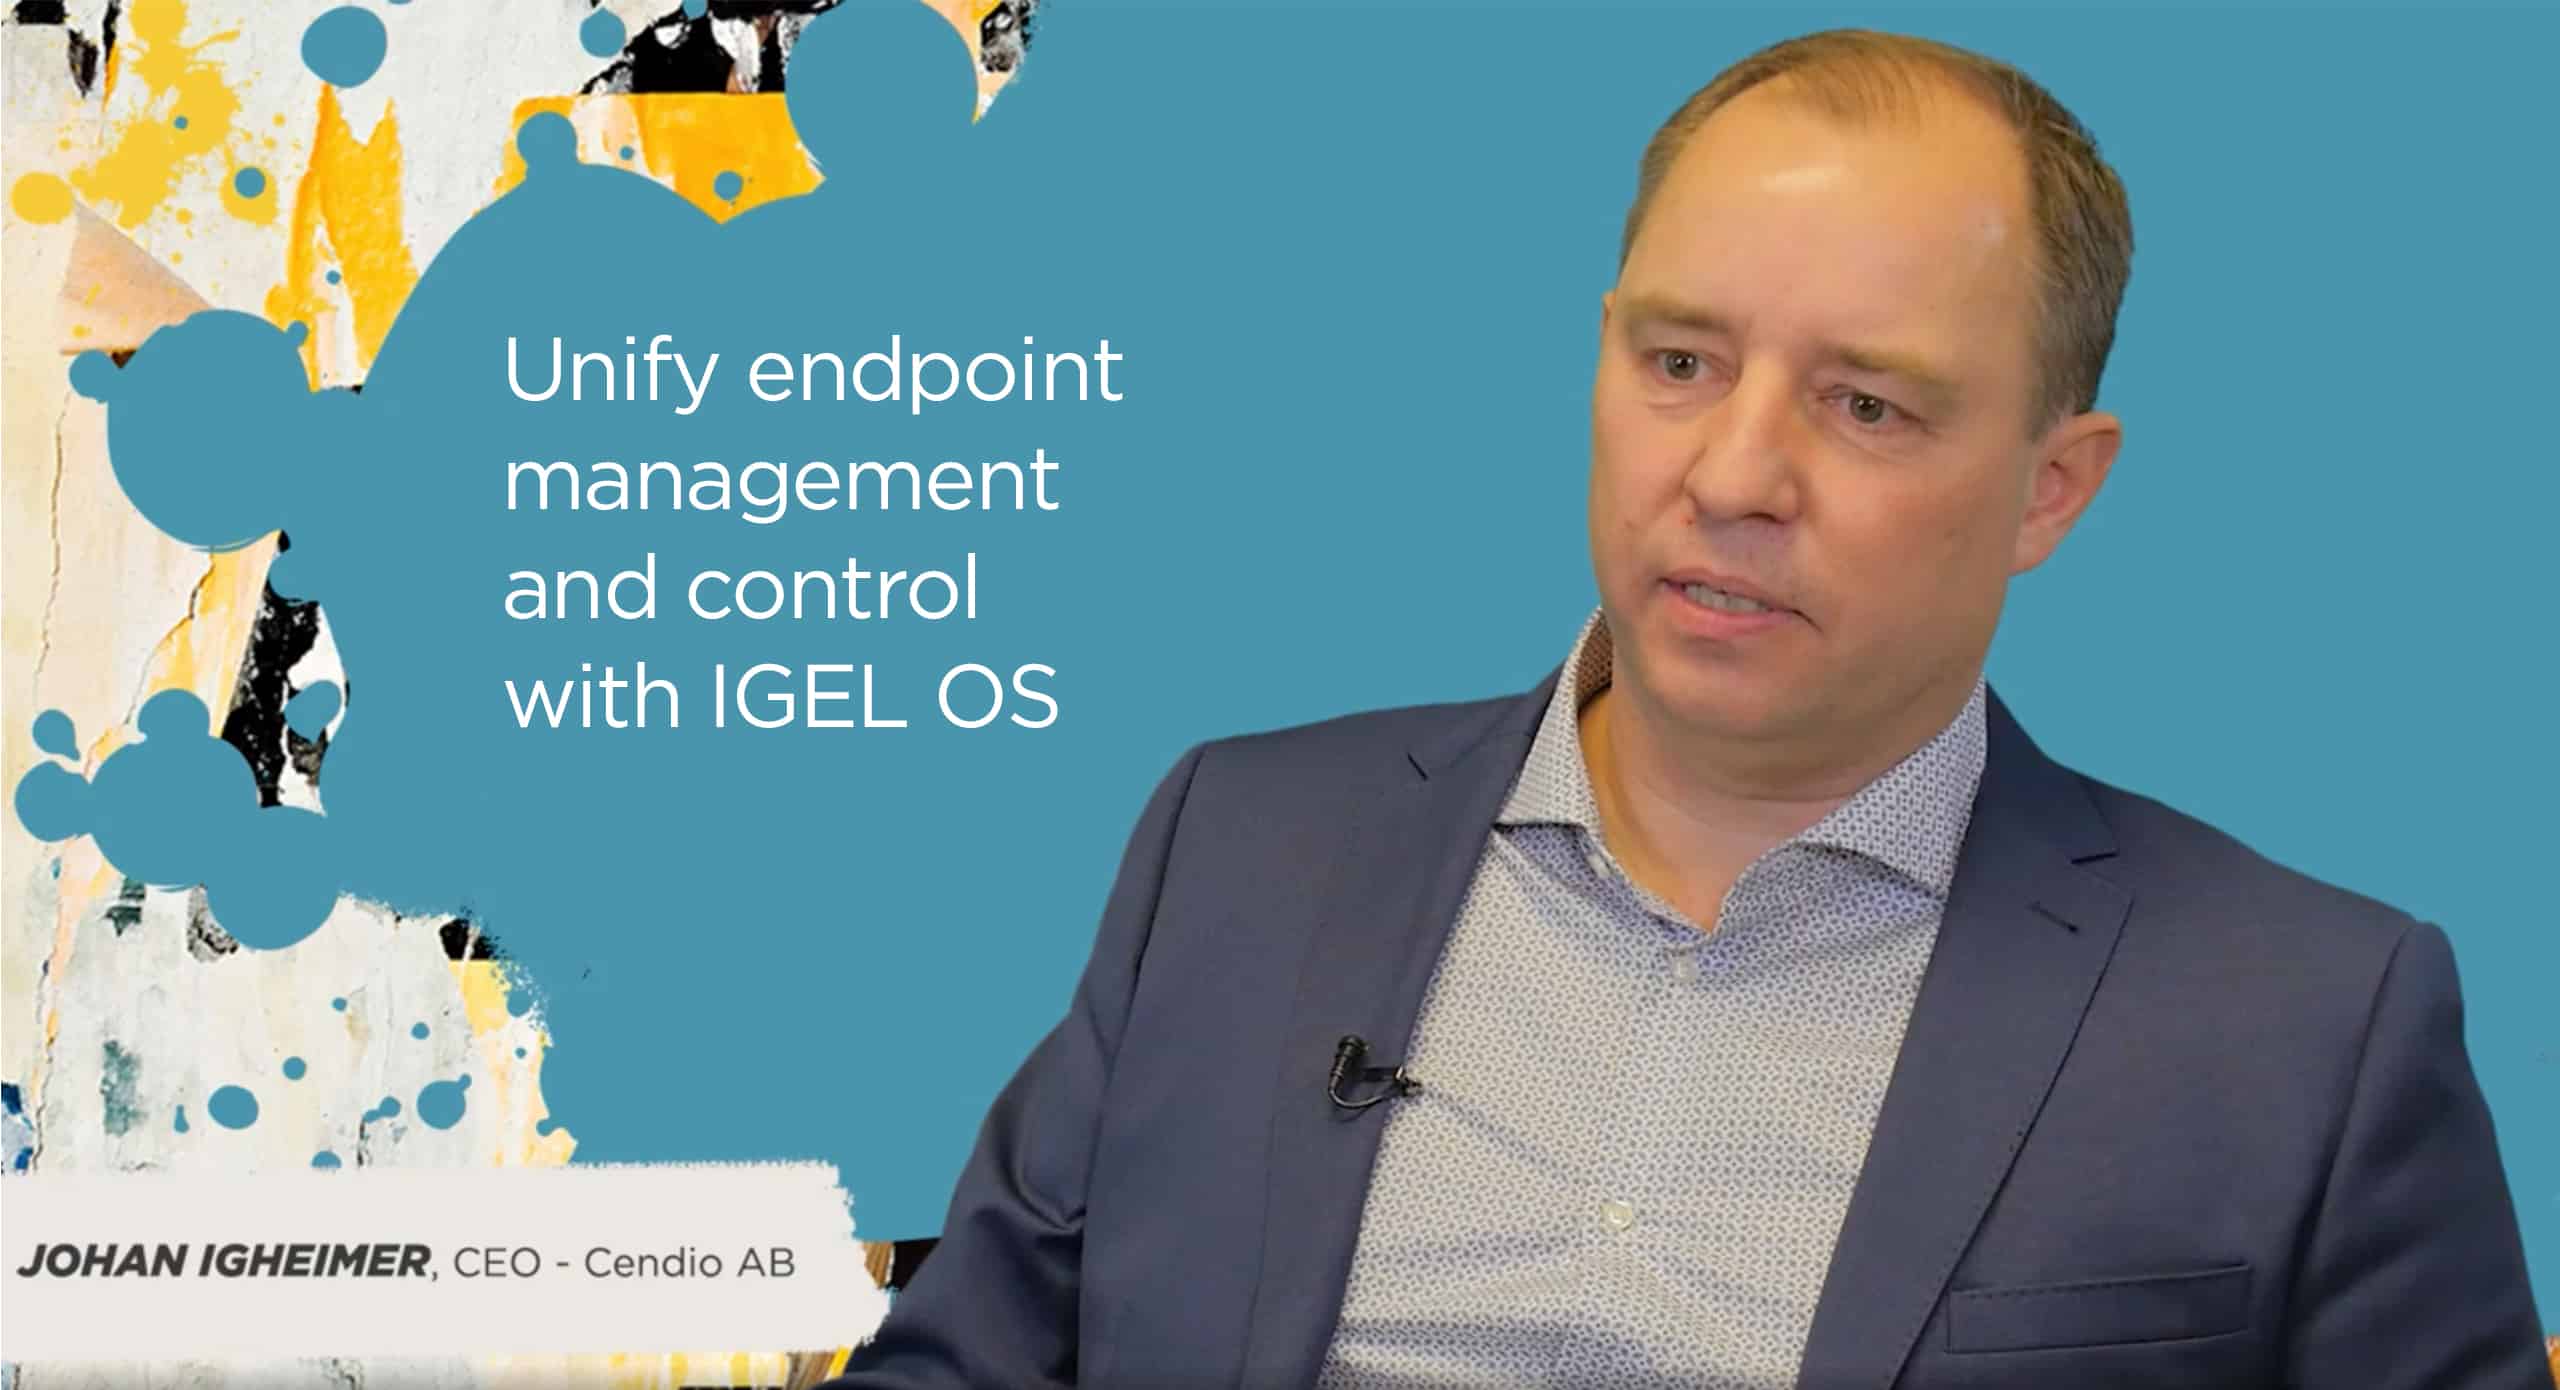 Unify endpoint management and control with IGEL OS